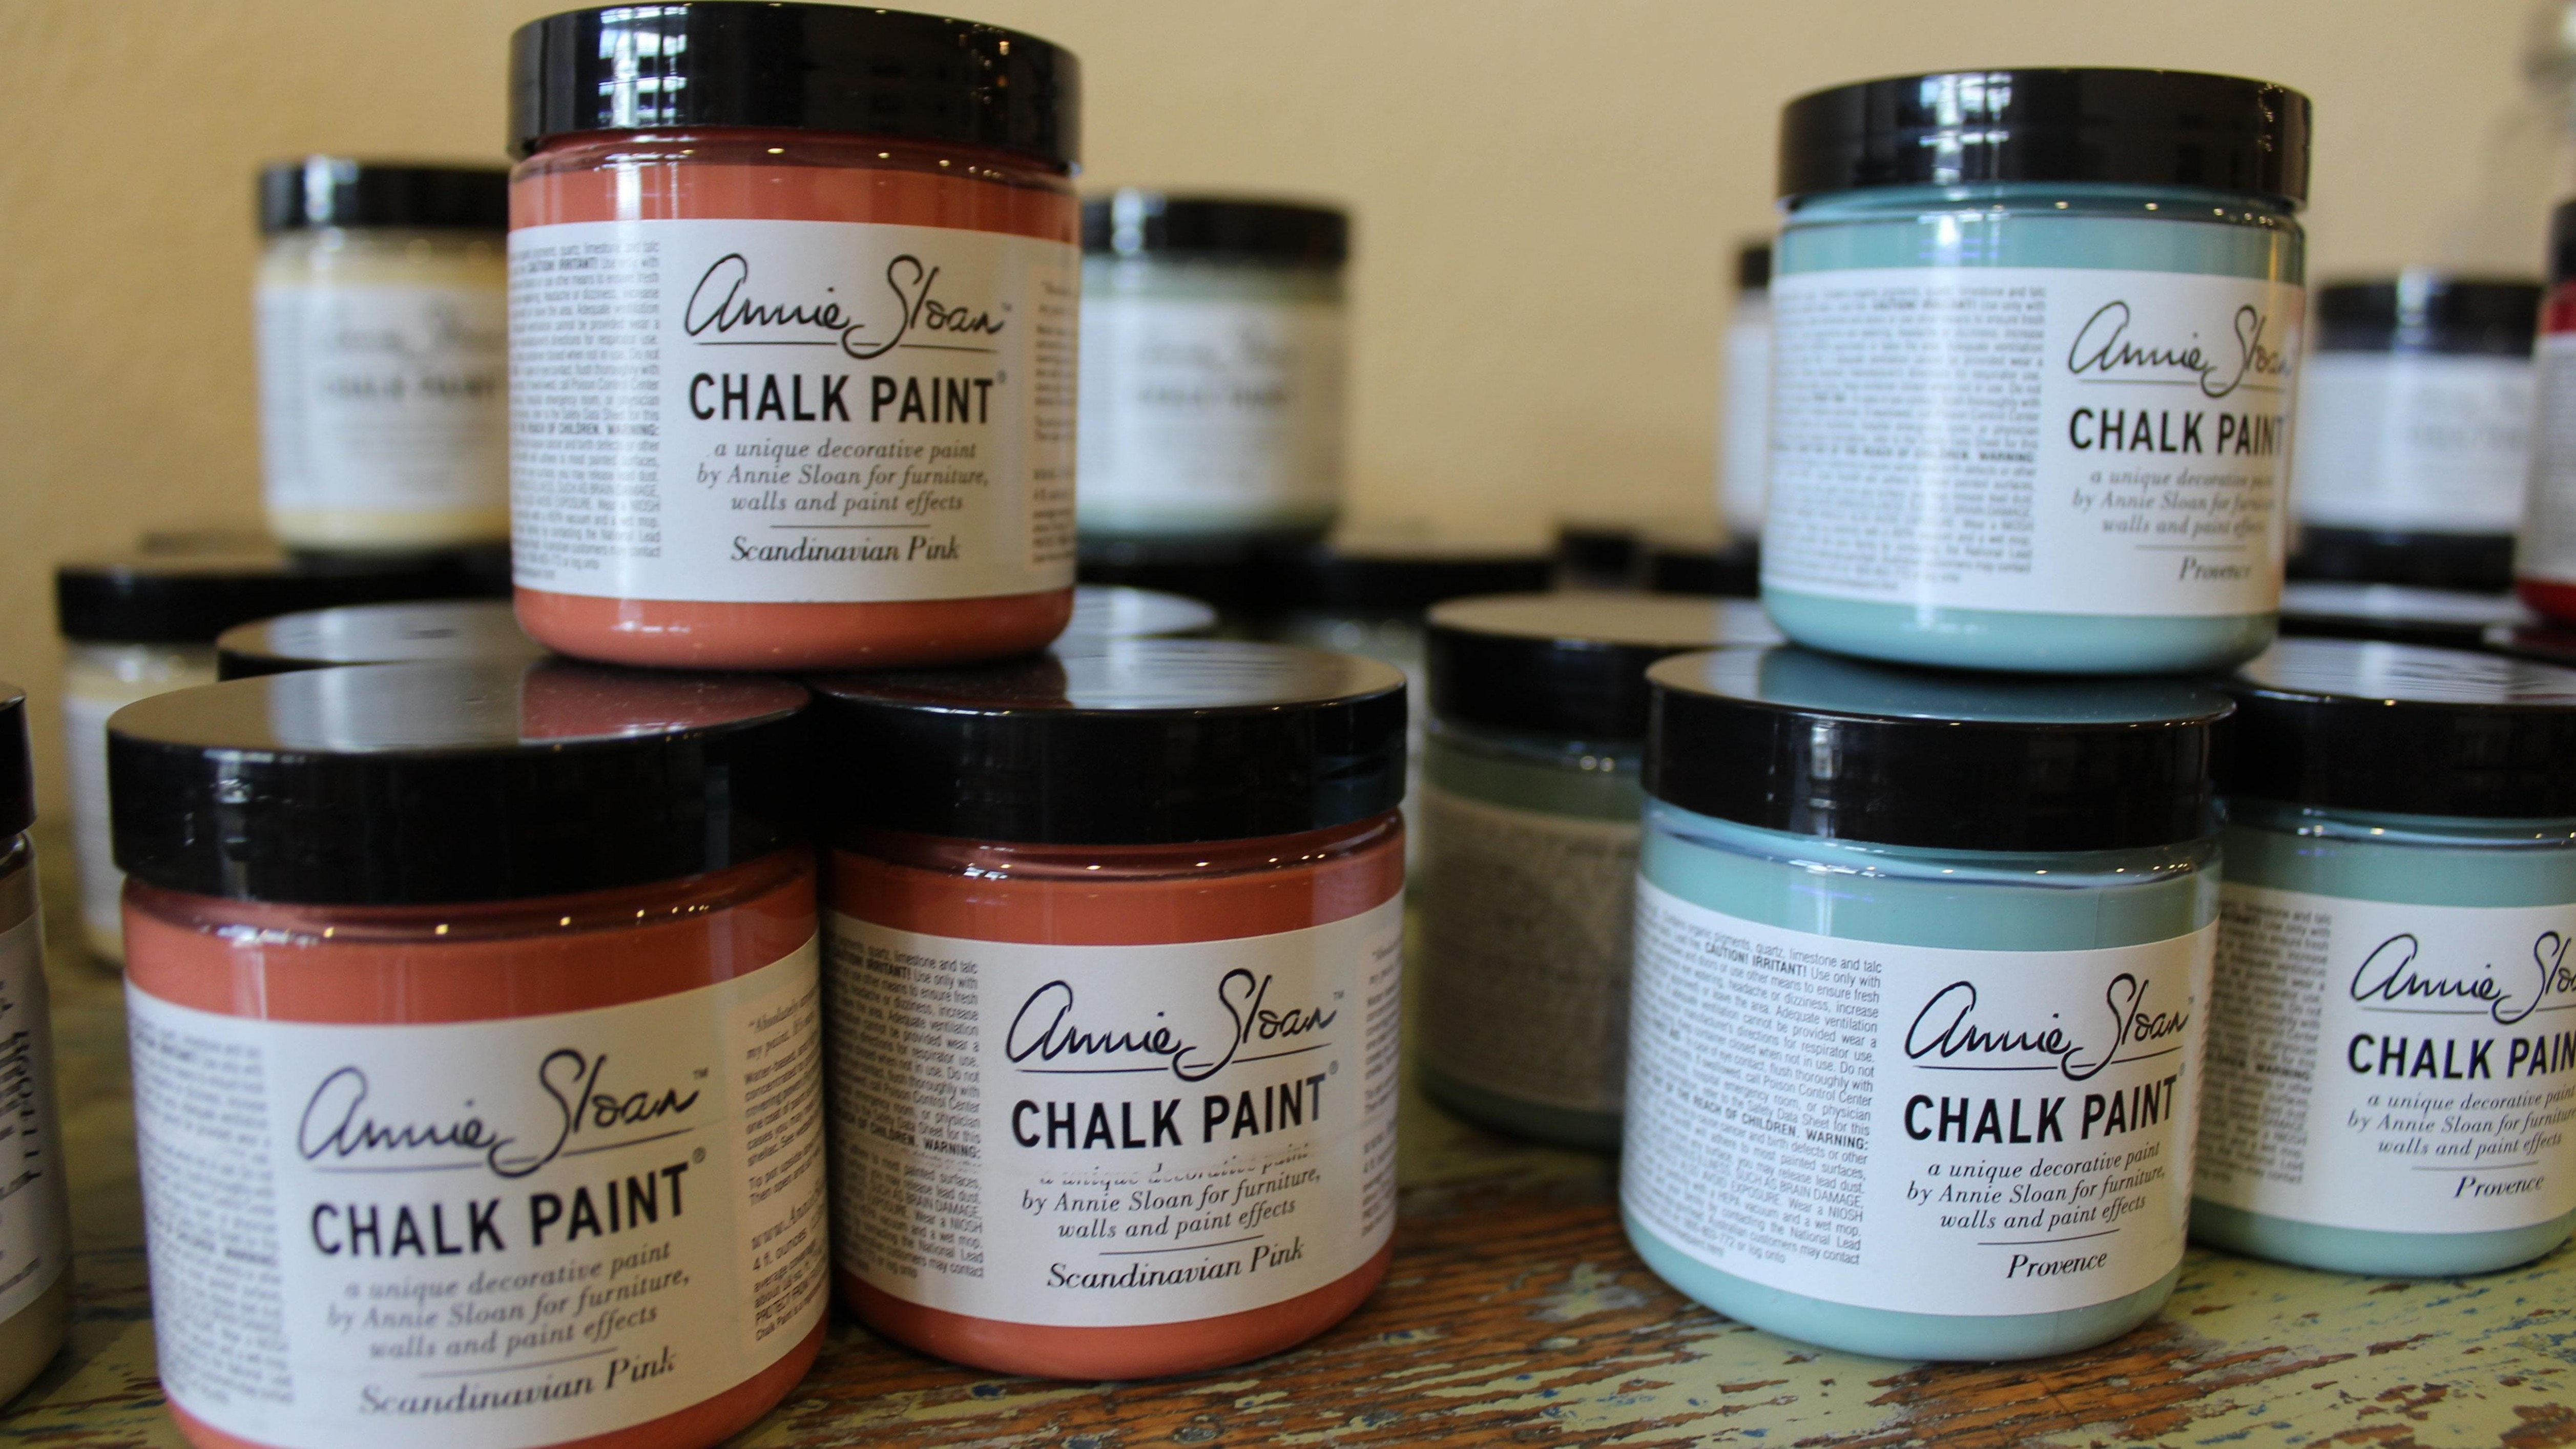 Wausau Daily Herald Where Can I Purchase Annie Sloan Chalk Paint Near Me